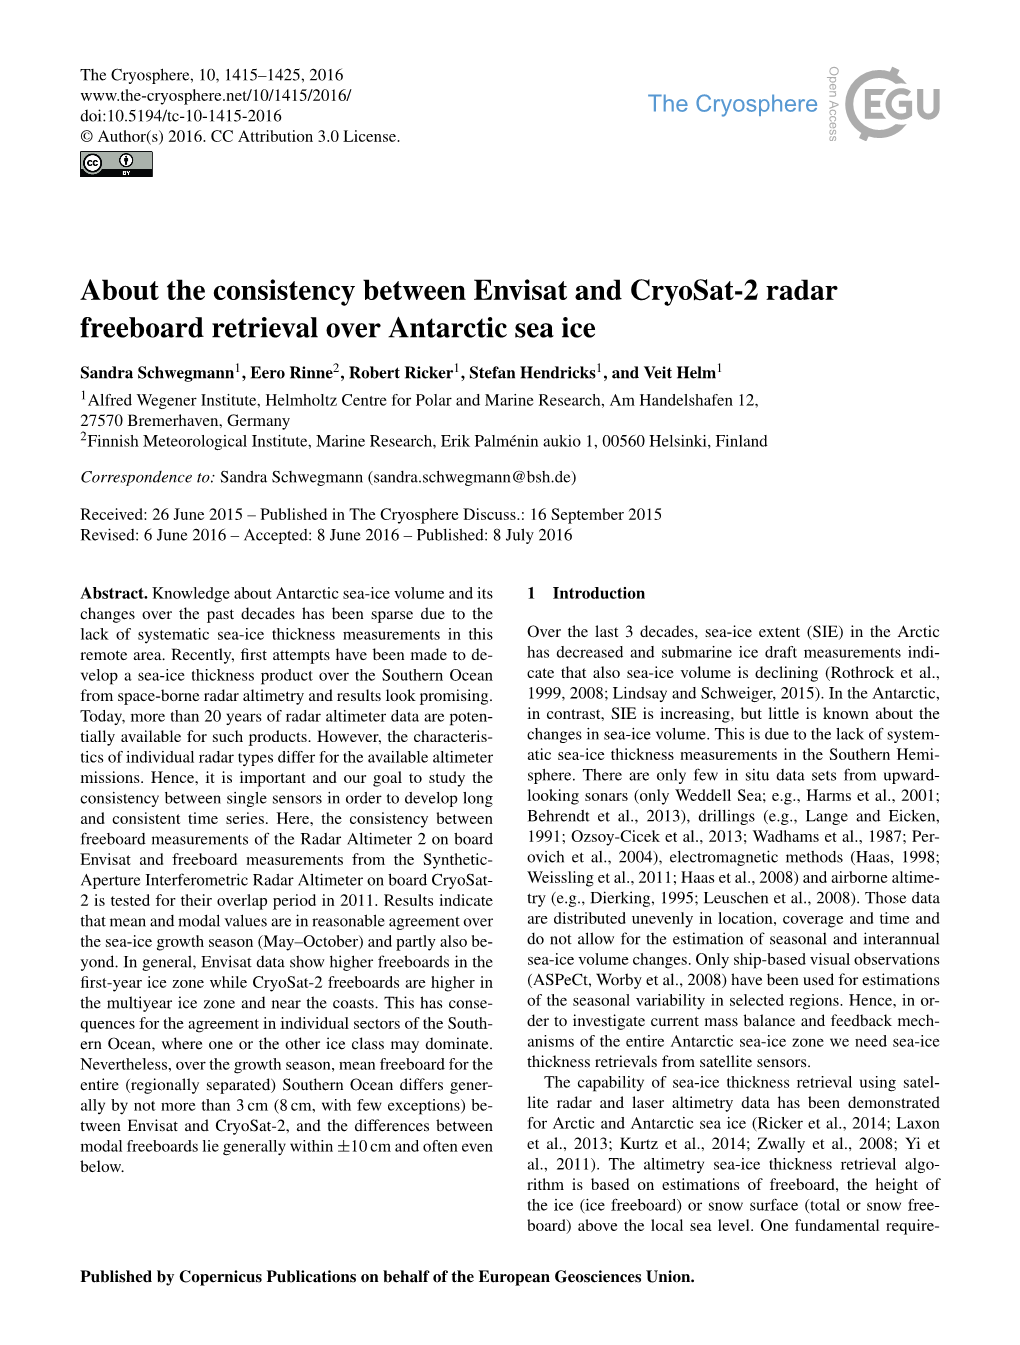 About the Consistency Between Envisat and Cryosat-2 Radar Freeboard Retrieval Over Antarctic Sea Ice